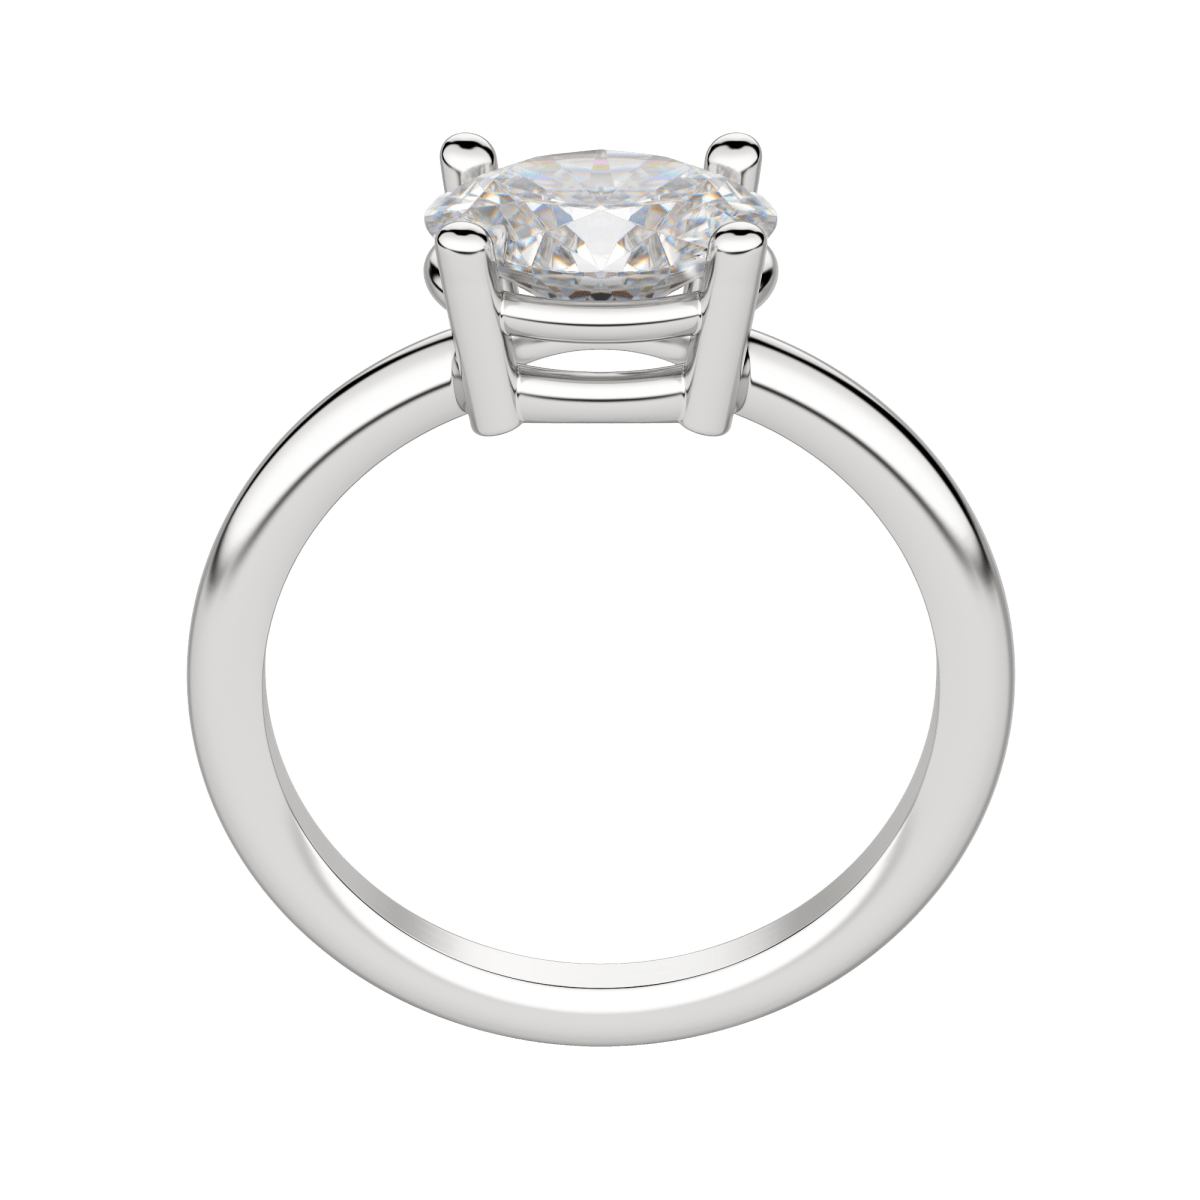 Mackena: Oval Solitaire Engagement Ring with a Thin Band | Ken & Dana Design